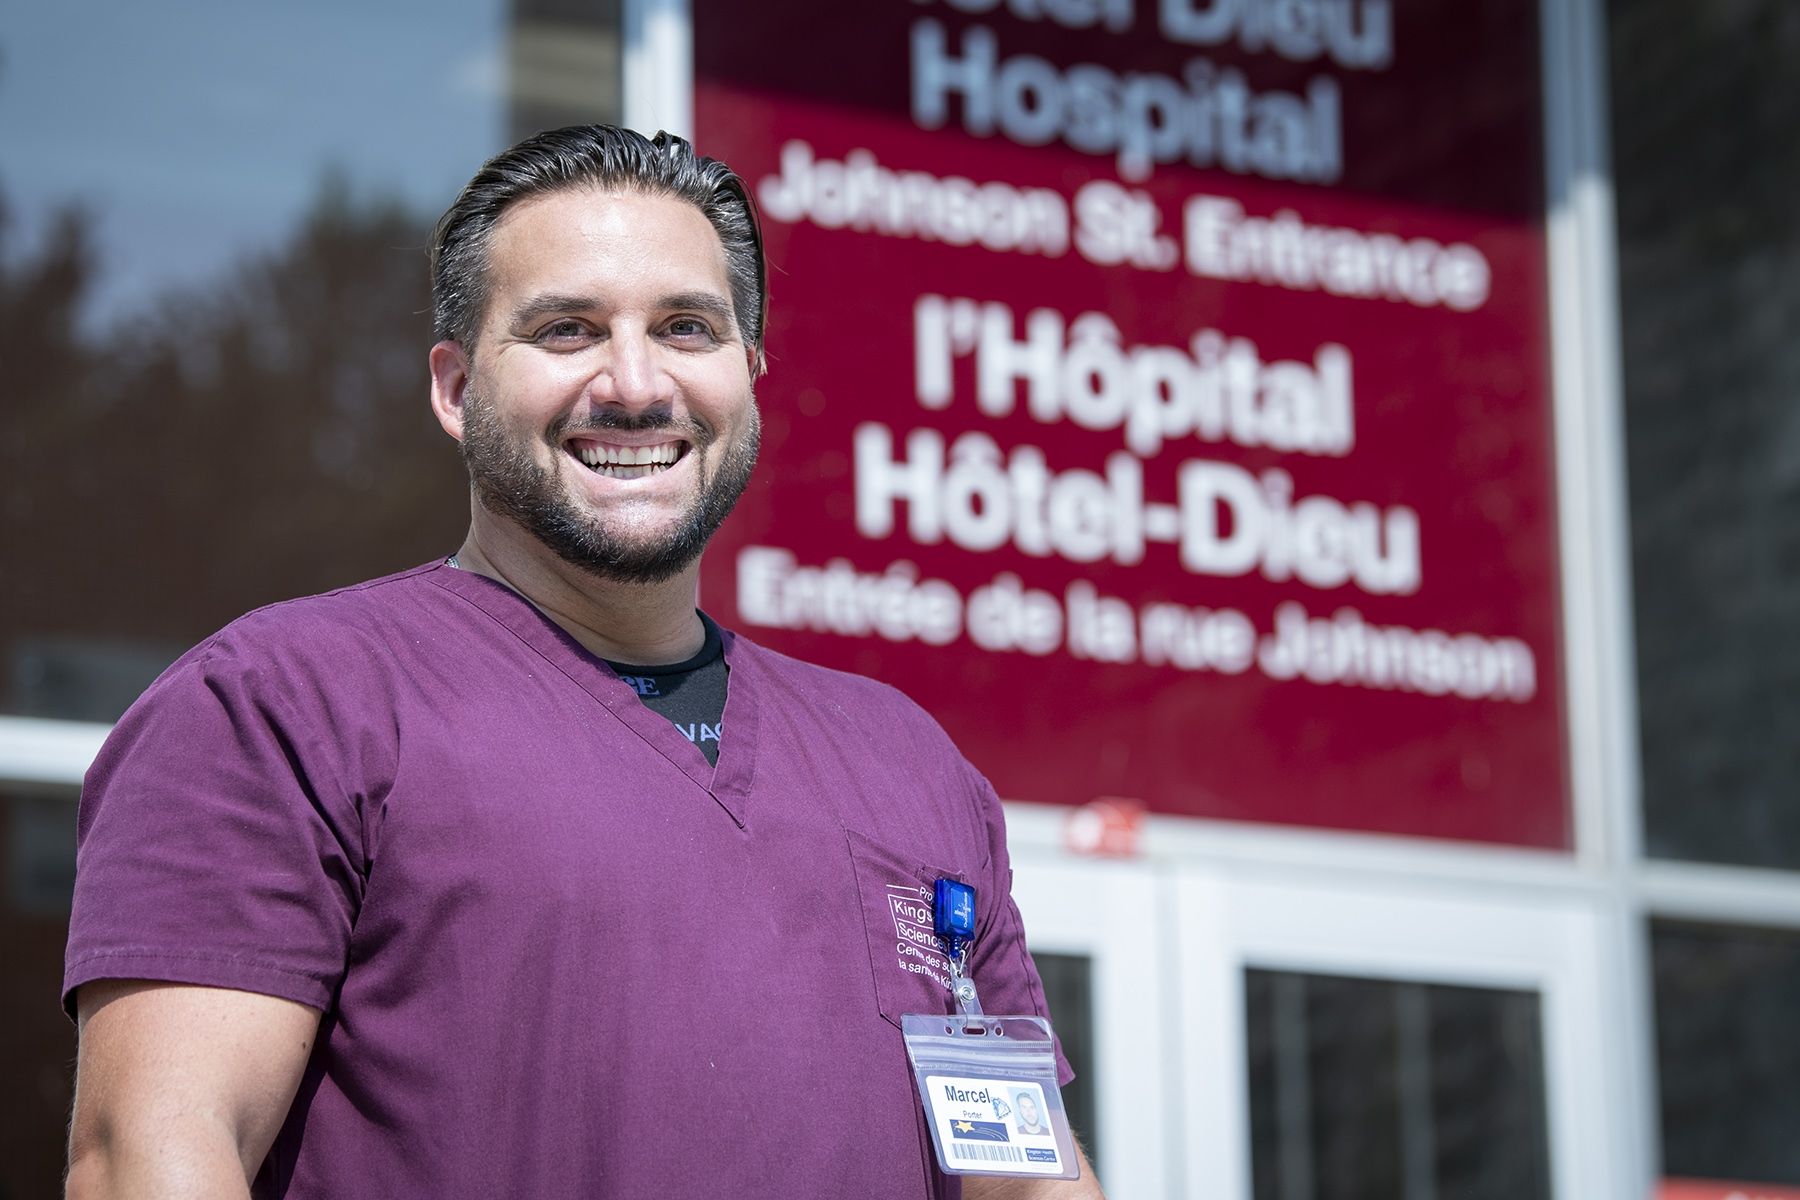 Marcel Cernik has short dark hair and a beard. He's wearing purple scrubs and pictured standing outside of Hotel Dieu Hospital.